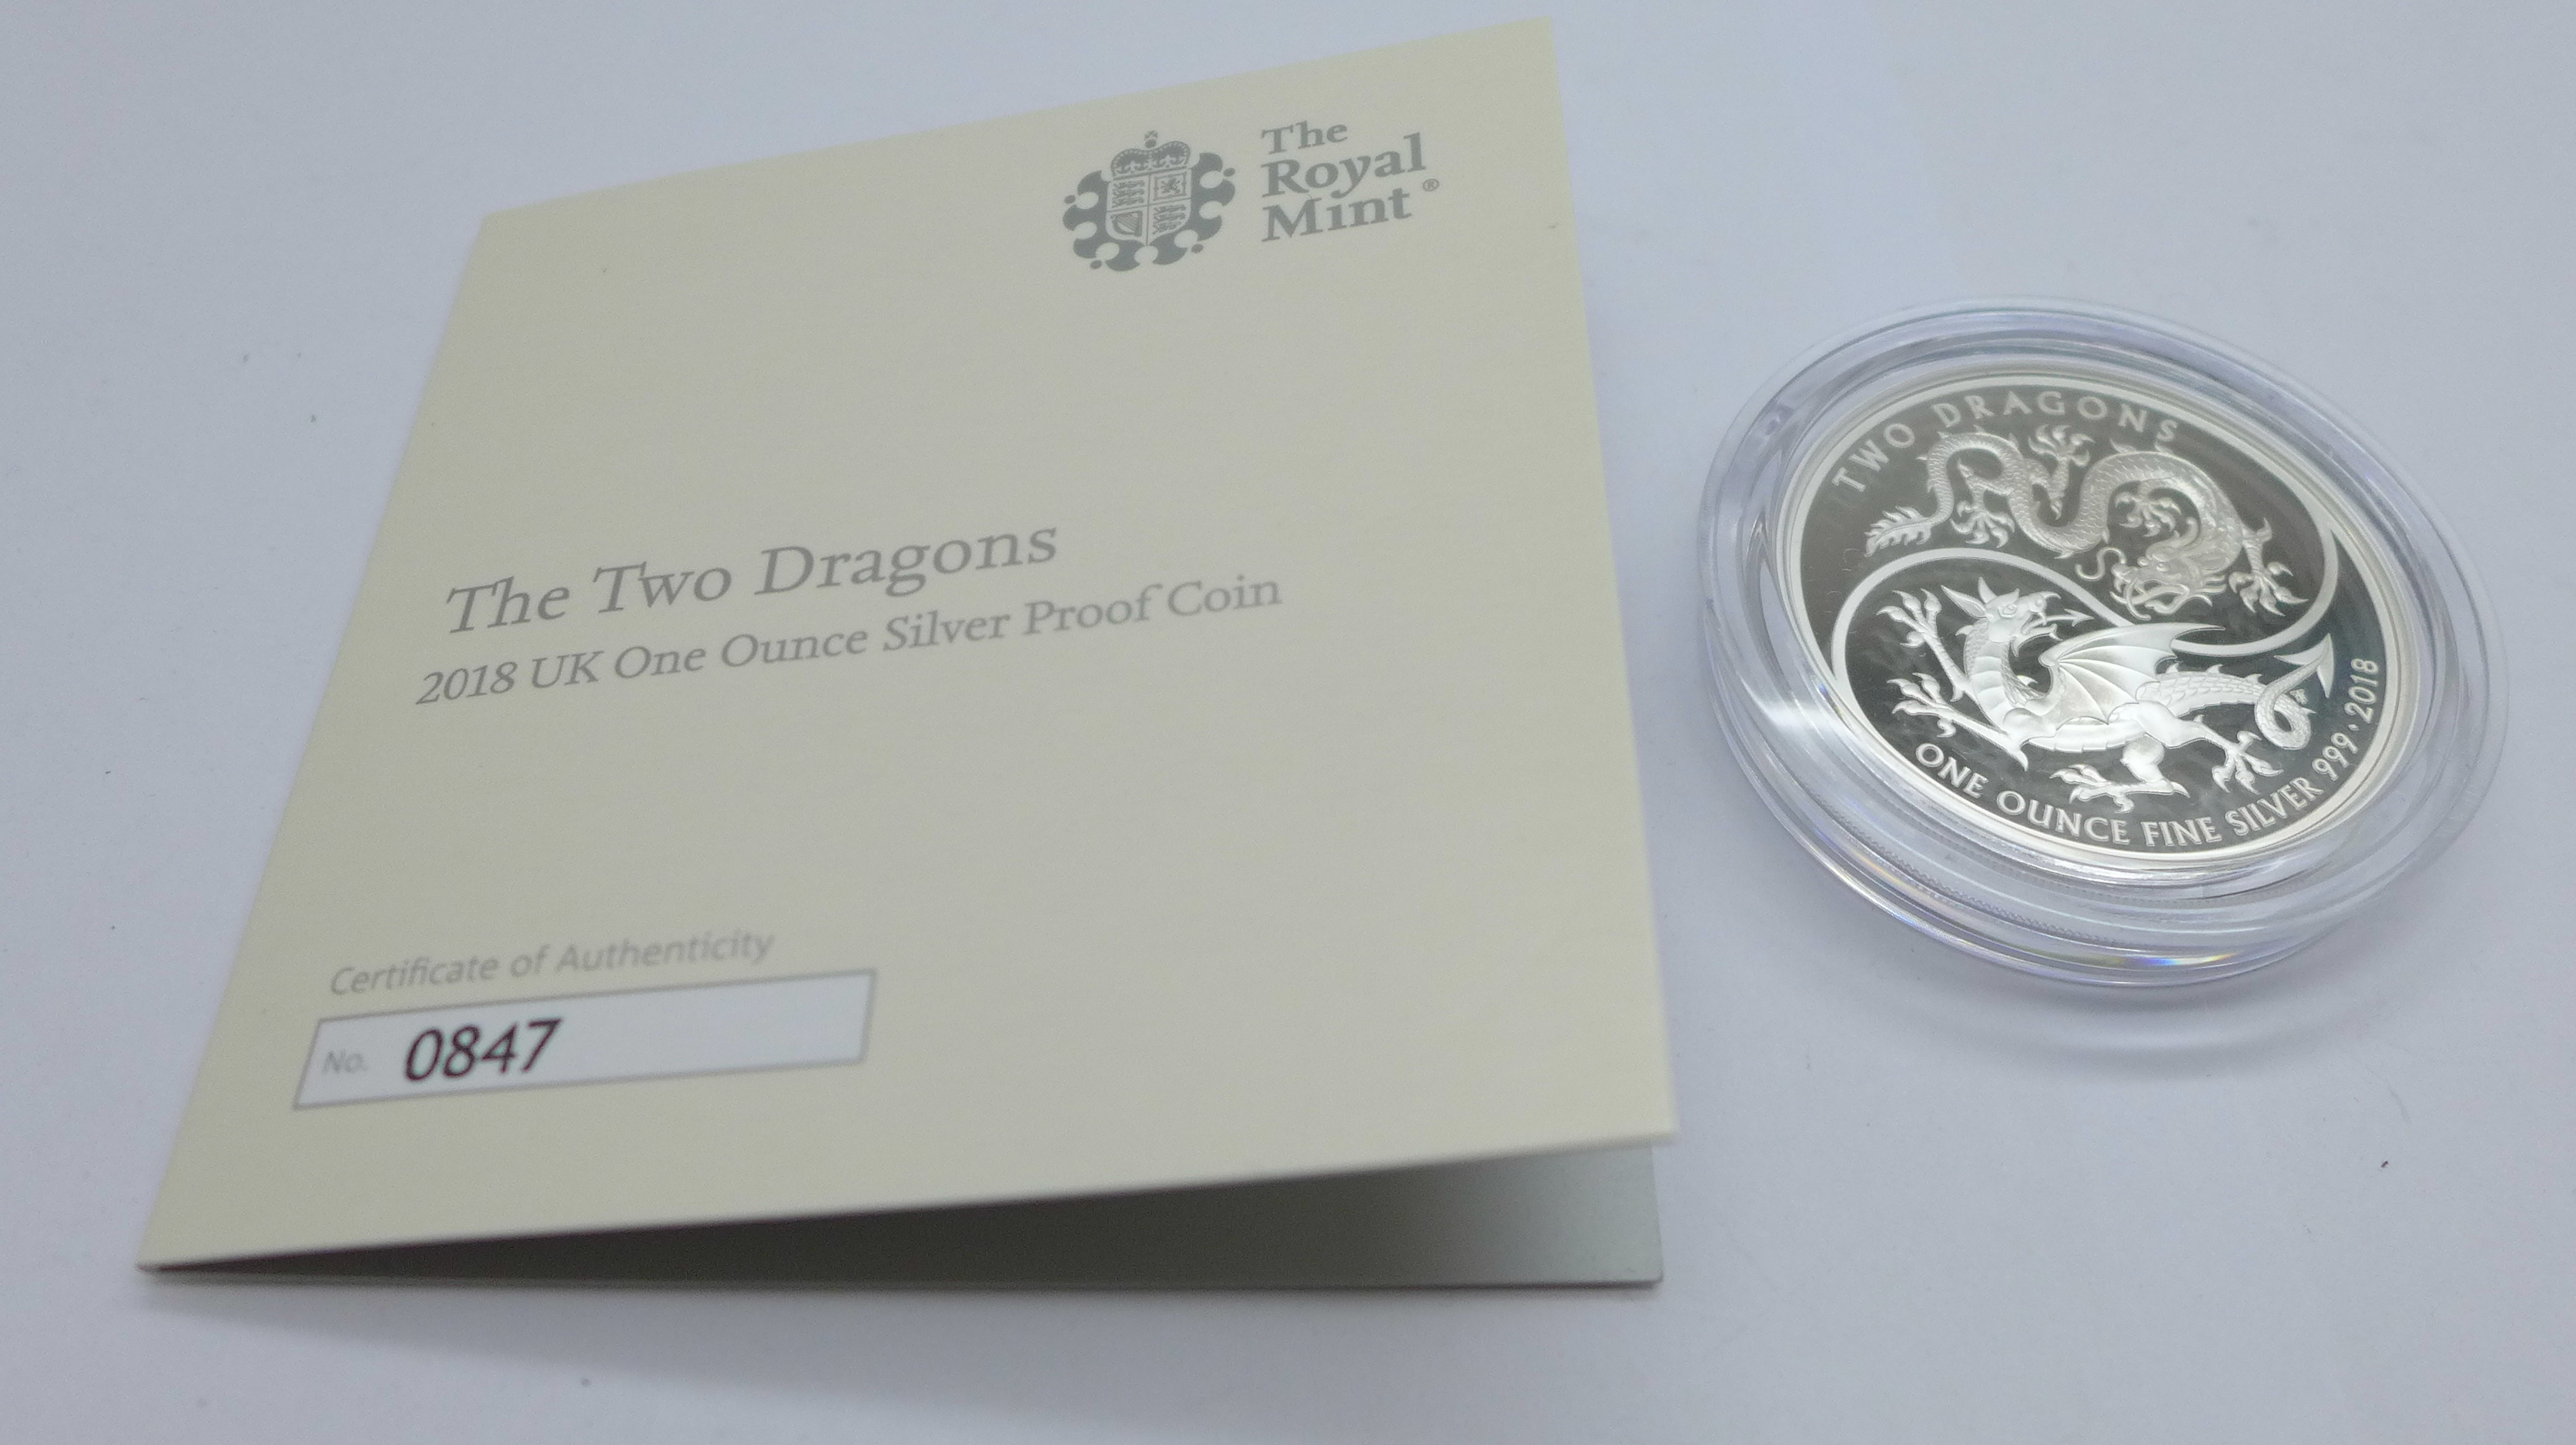 The Two Dragons 2018 UK one ounce fine silver proof coin with Certificate of Authenticity, no. 0847